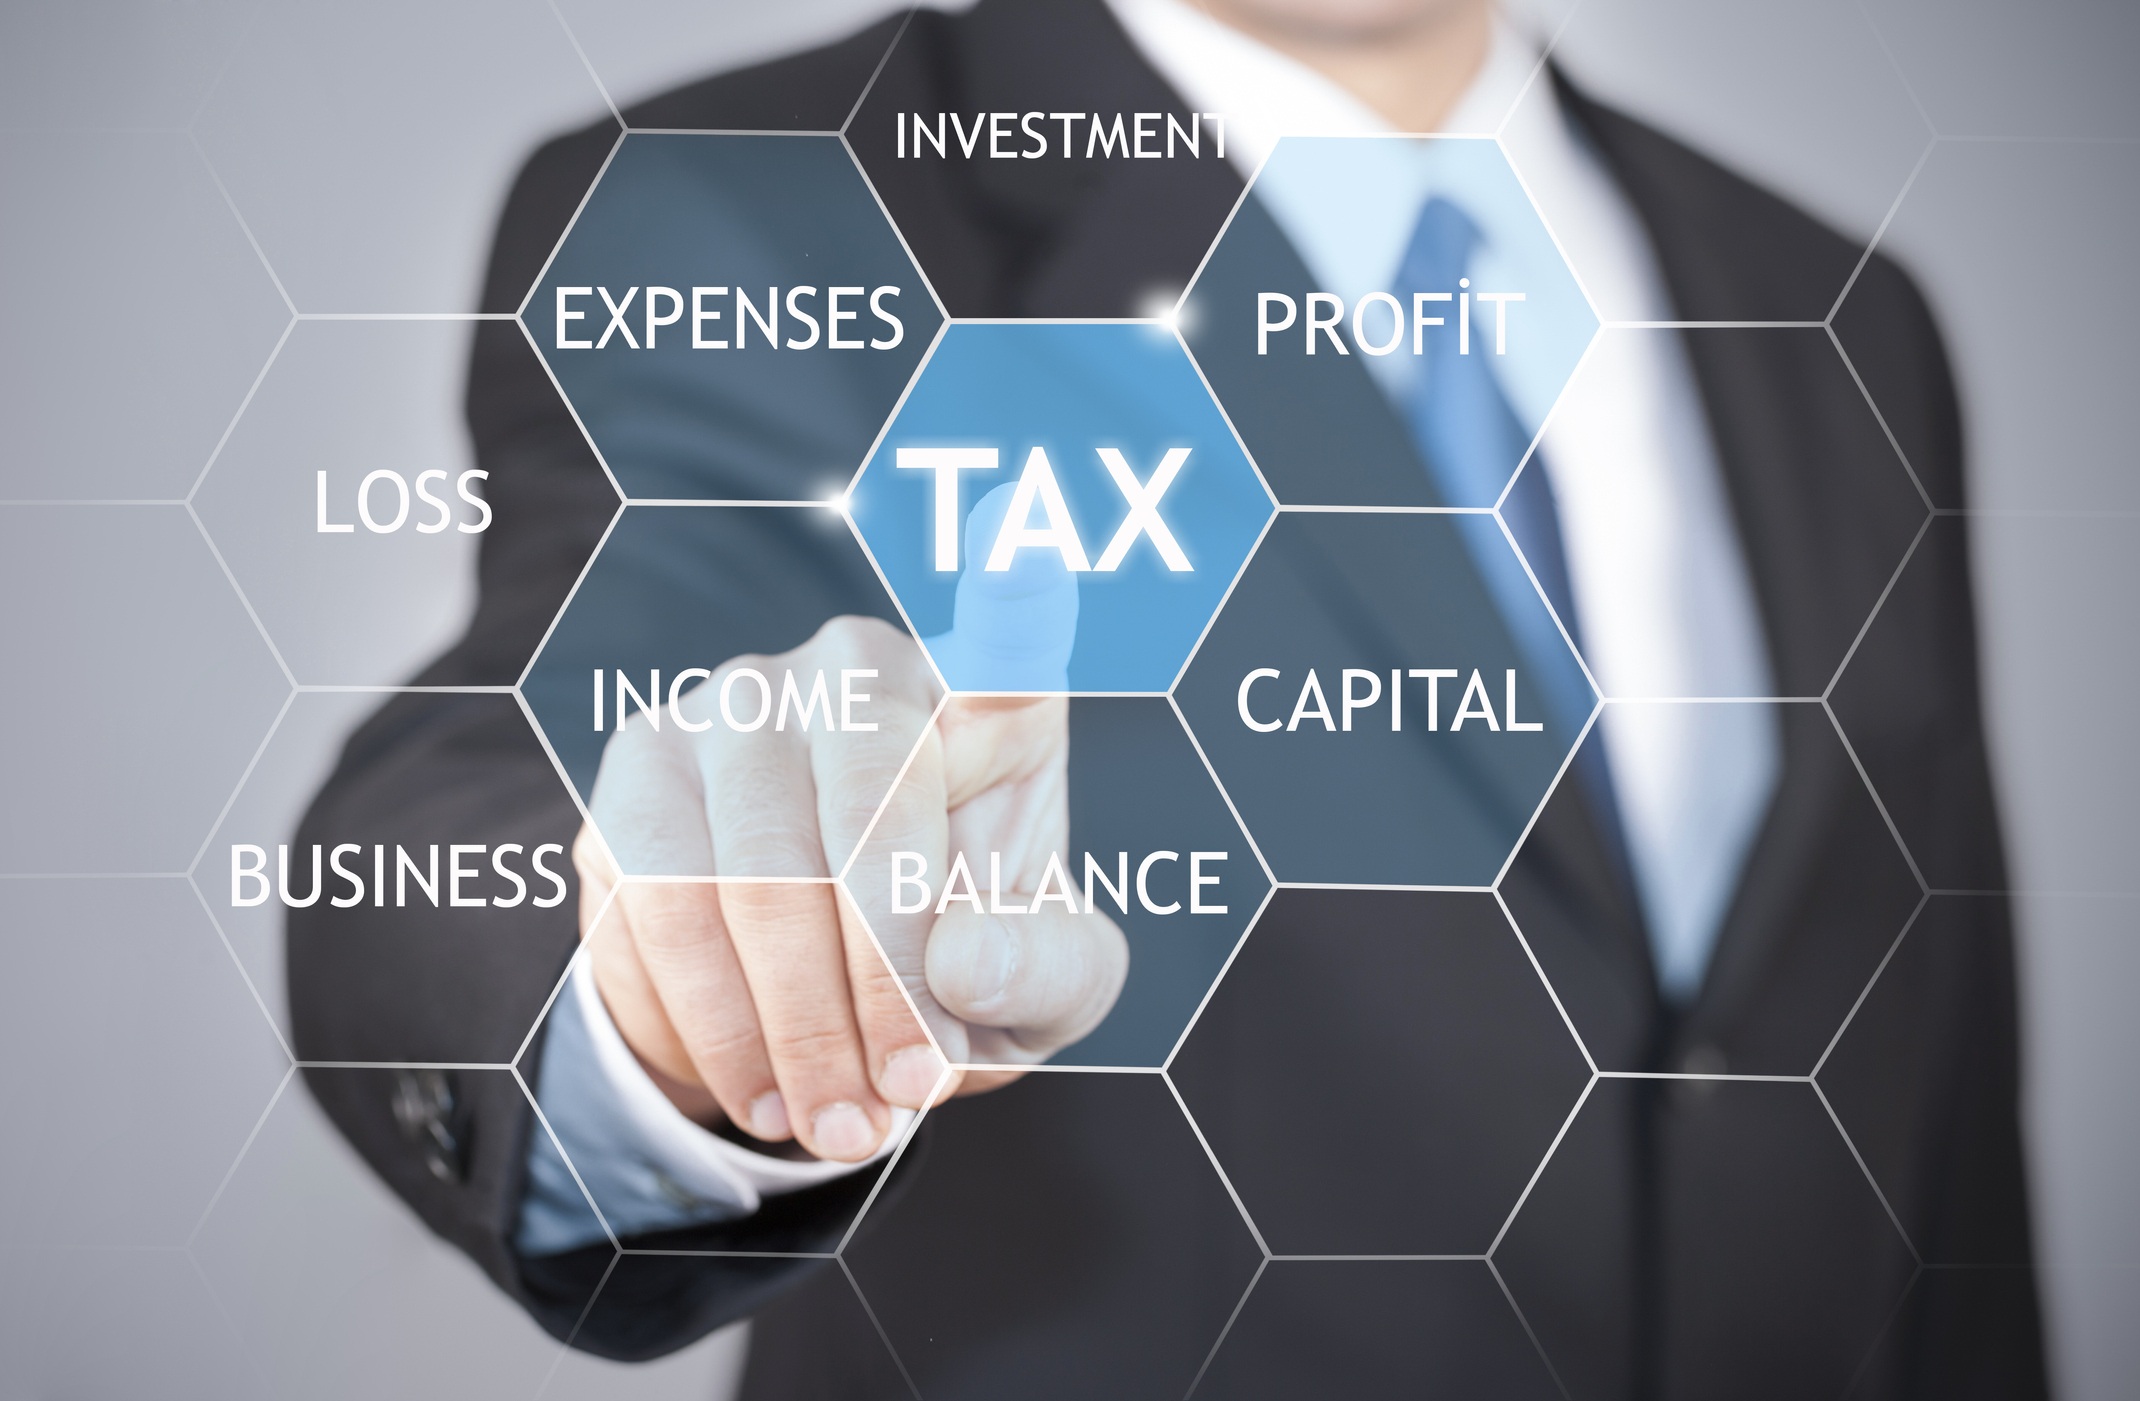 Bus Blog How to Save Big for Your Small Business This Tax Season